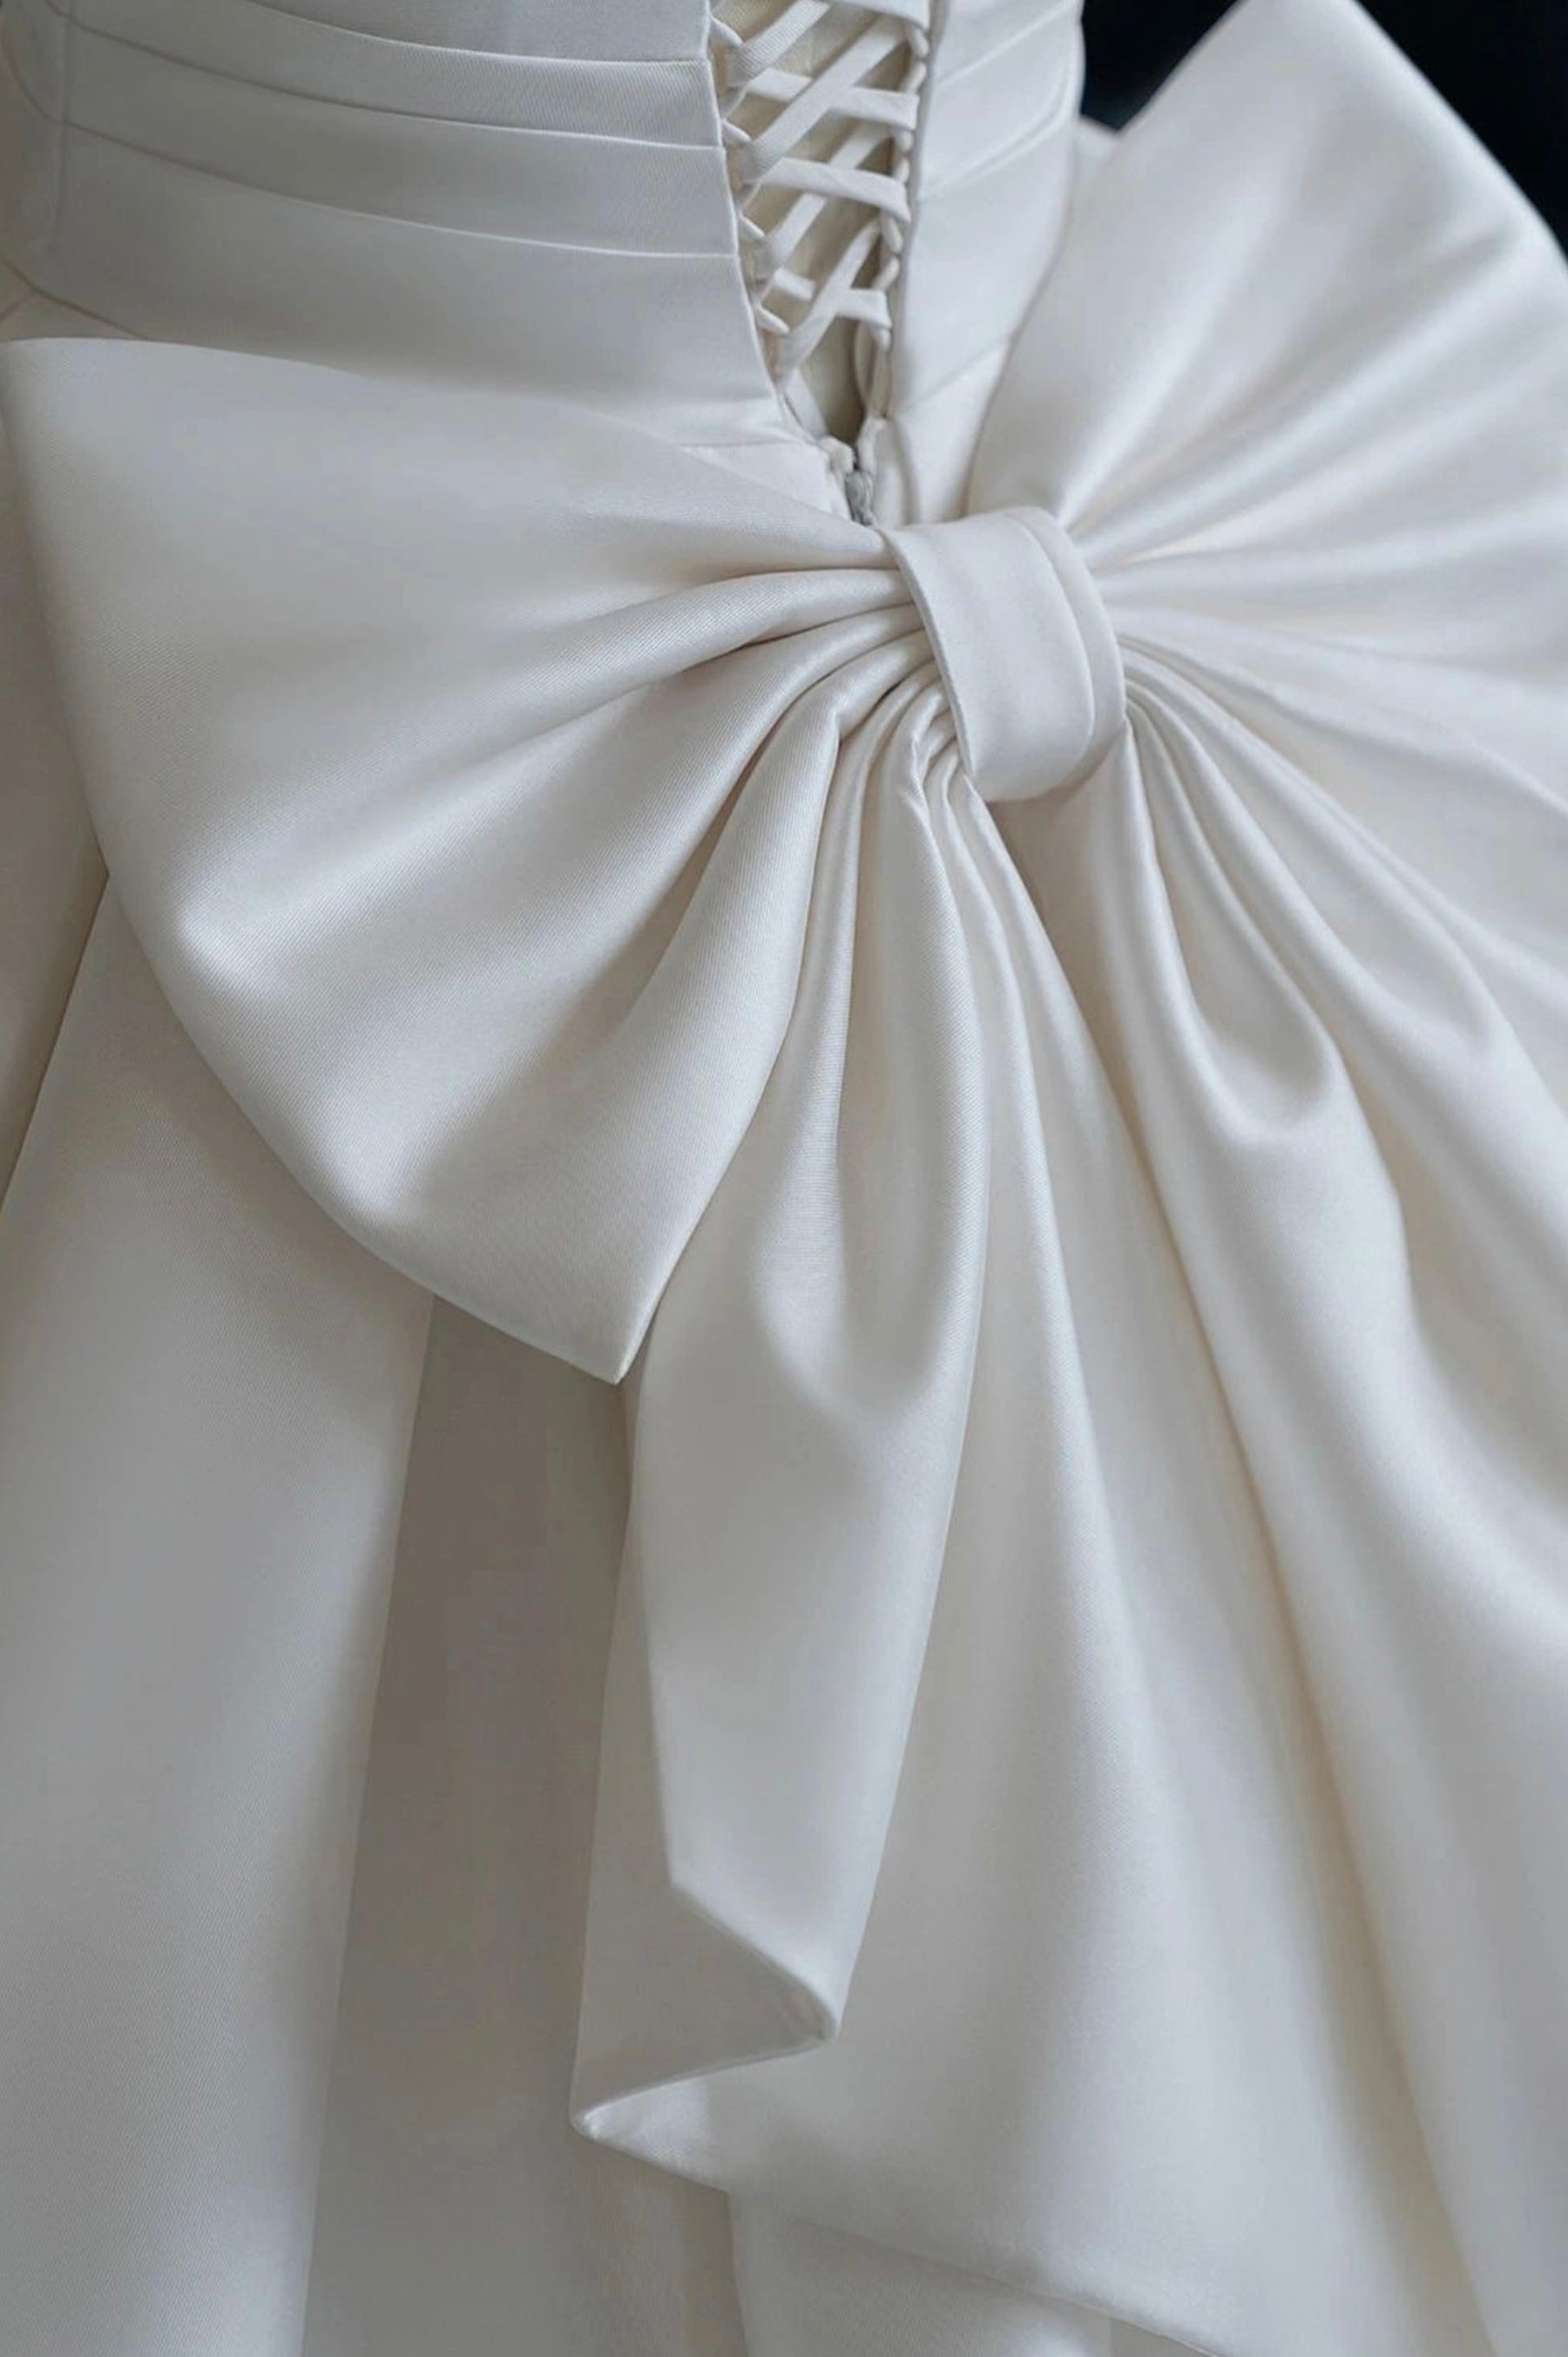 A-Line V-Neck Satin Wedding Dress, White Short Sleeve Bridal Gown with Bow